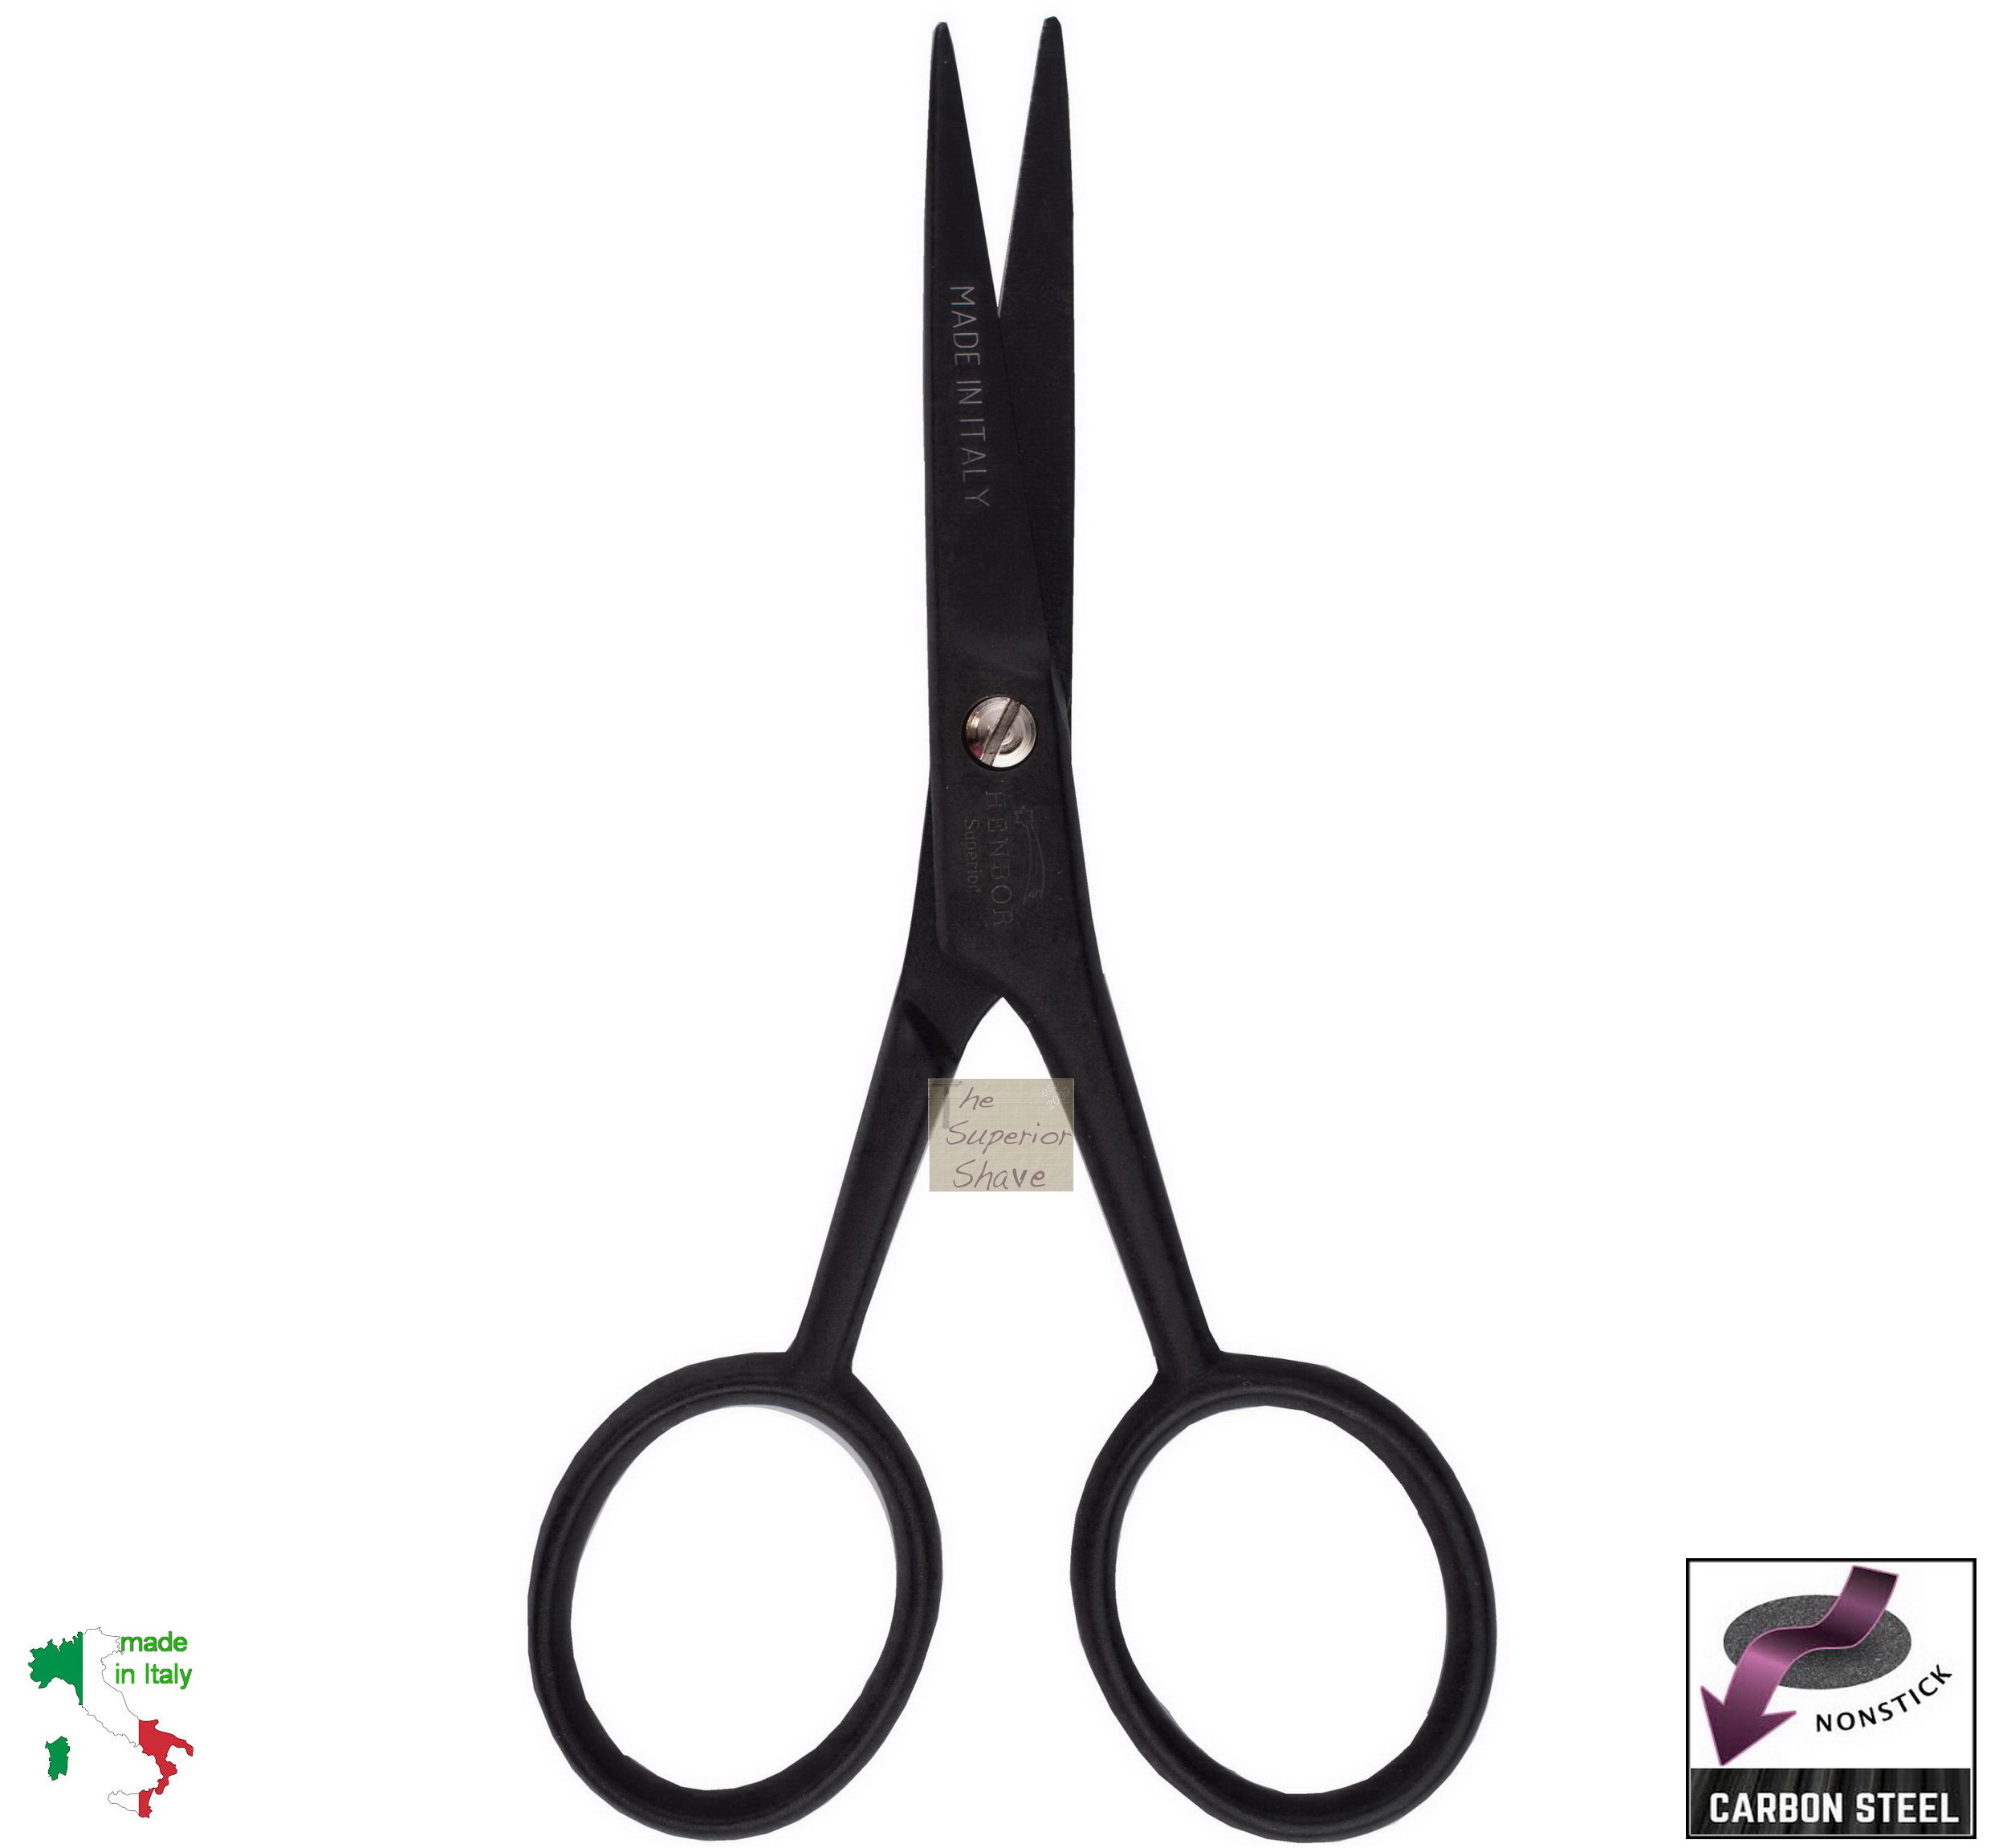 Sharpening Hair Scissors: How to Start A Rewarding Home-Based Business